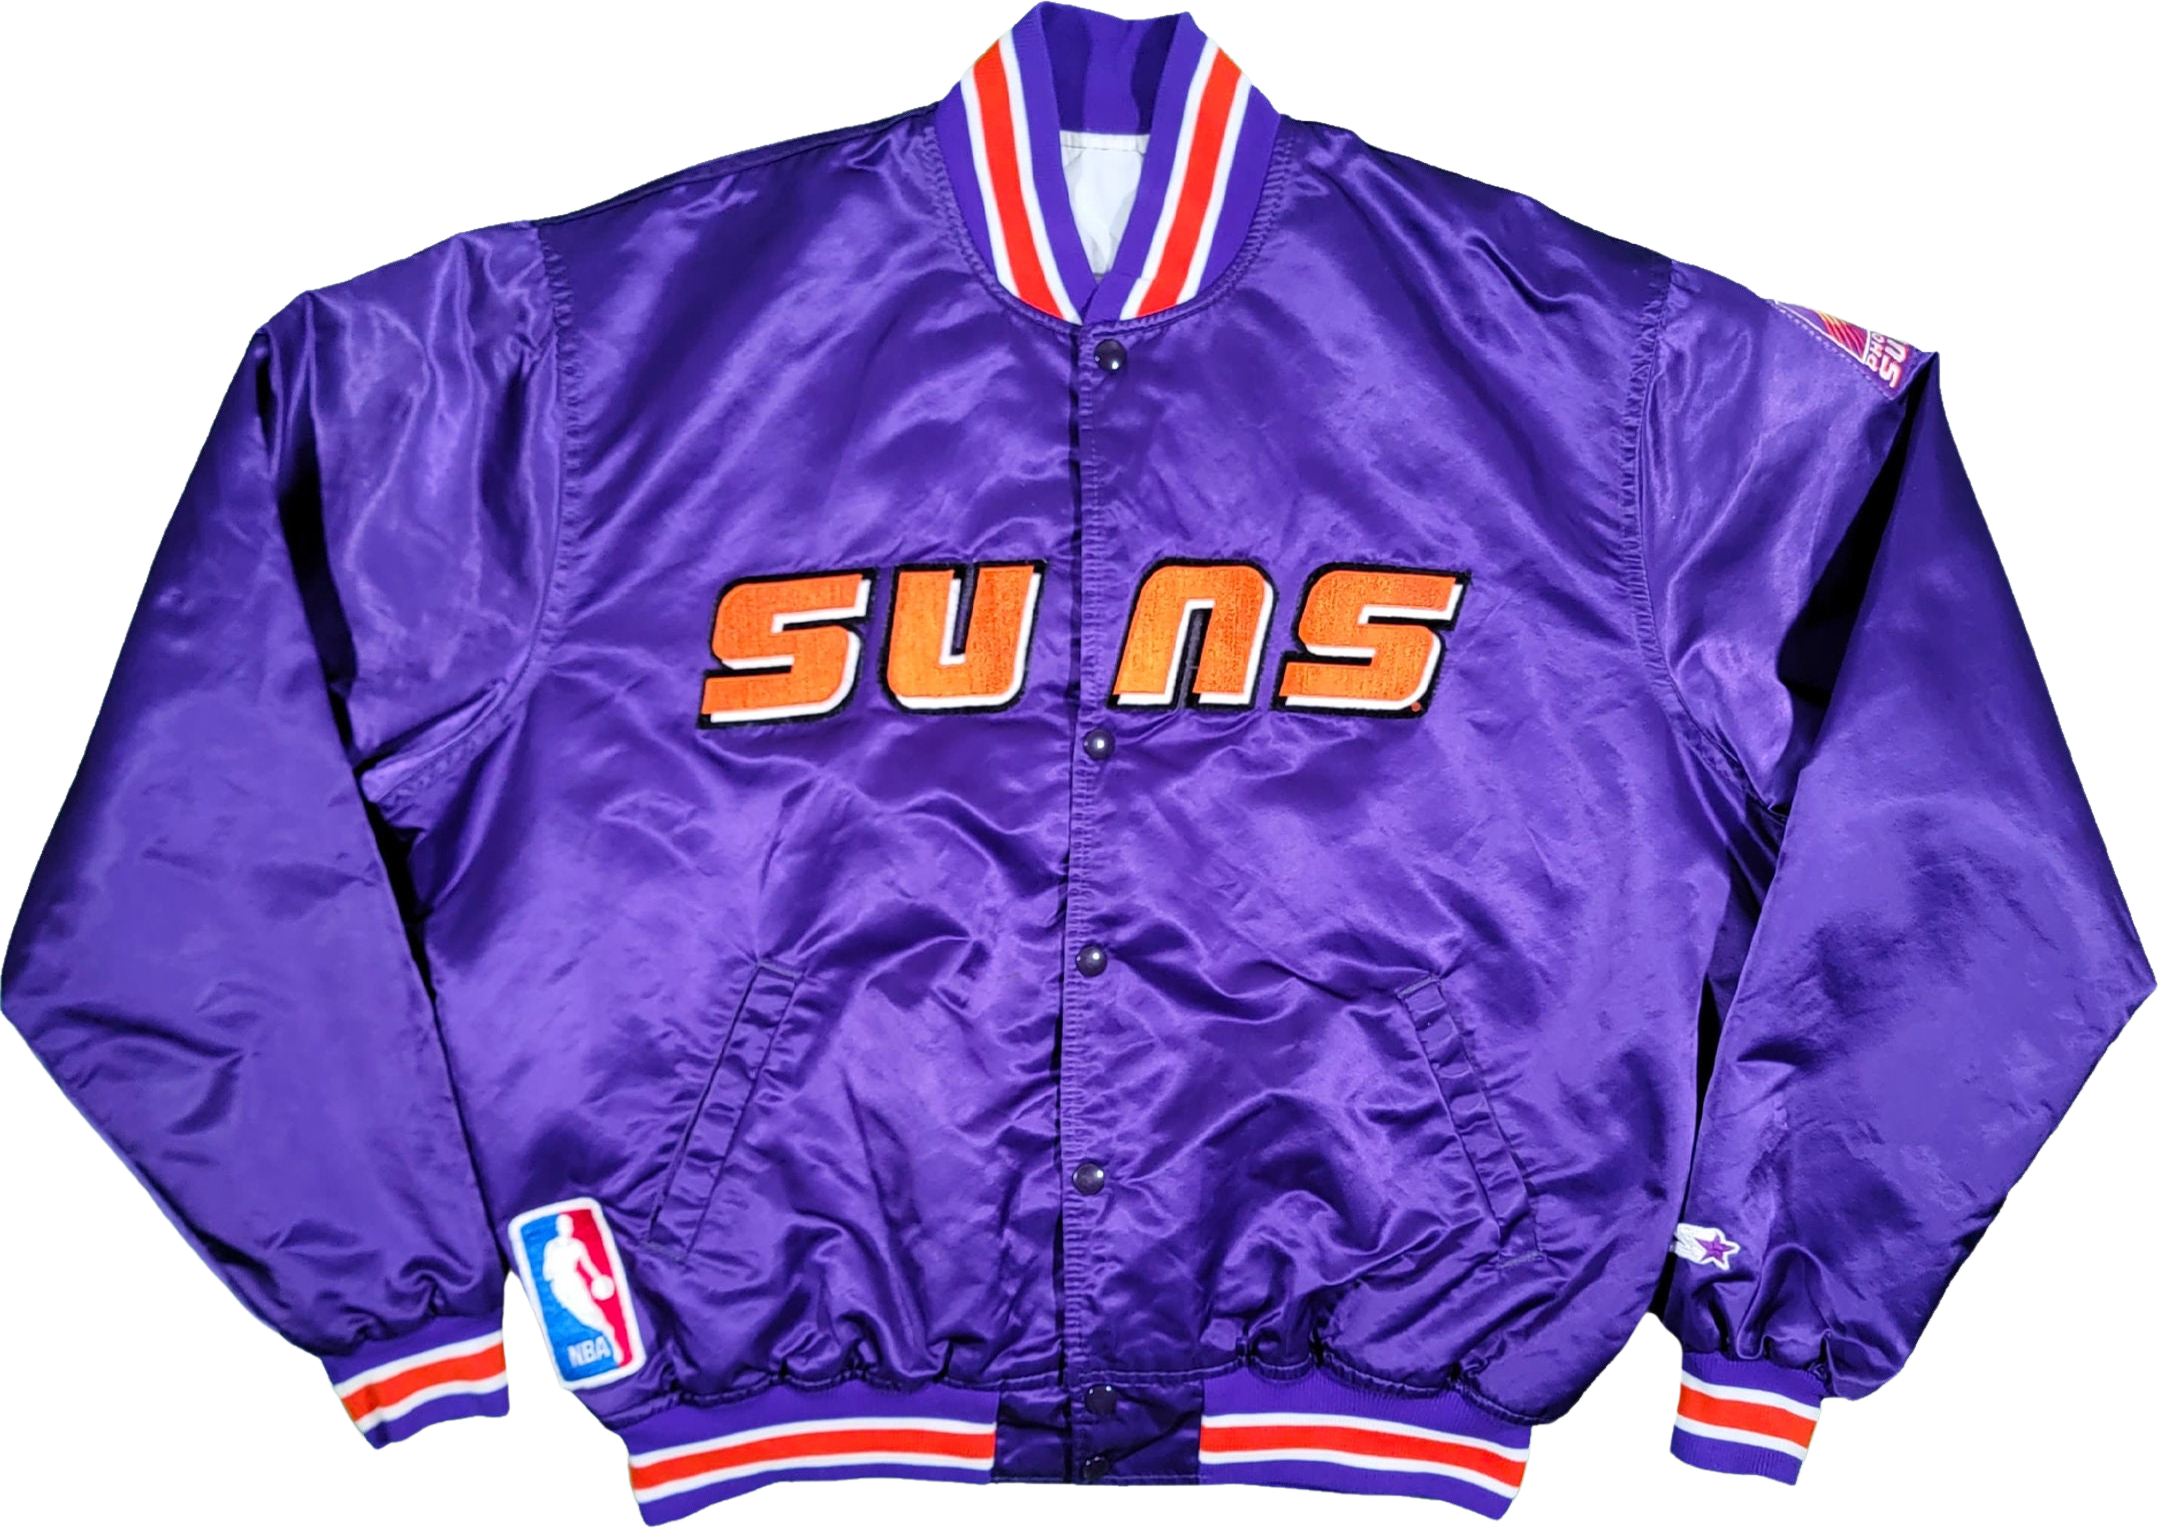 Vintage Phoenix Suns jacket I found for $7 . This was such a great